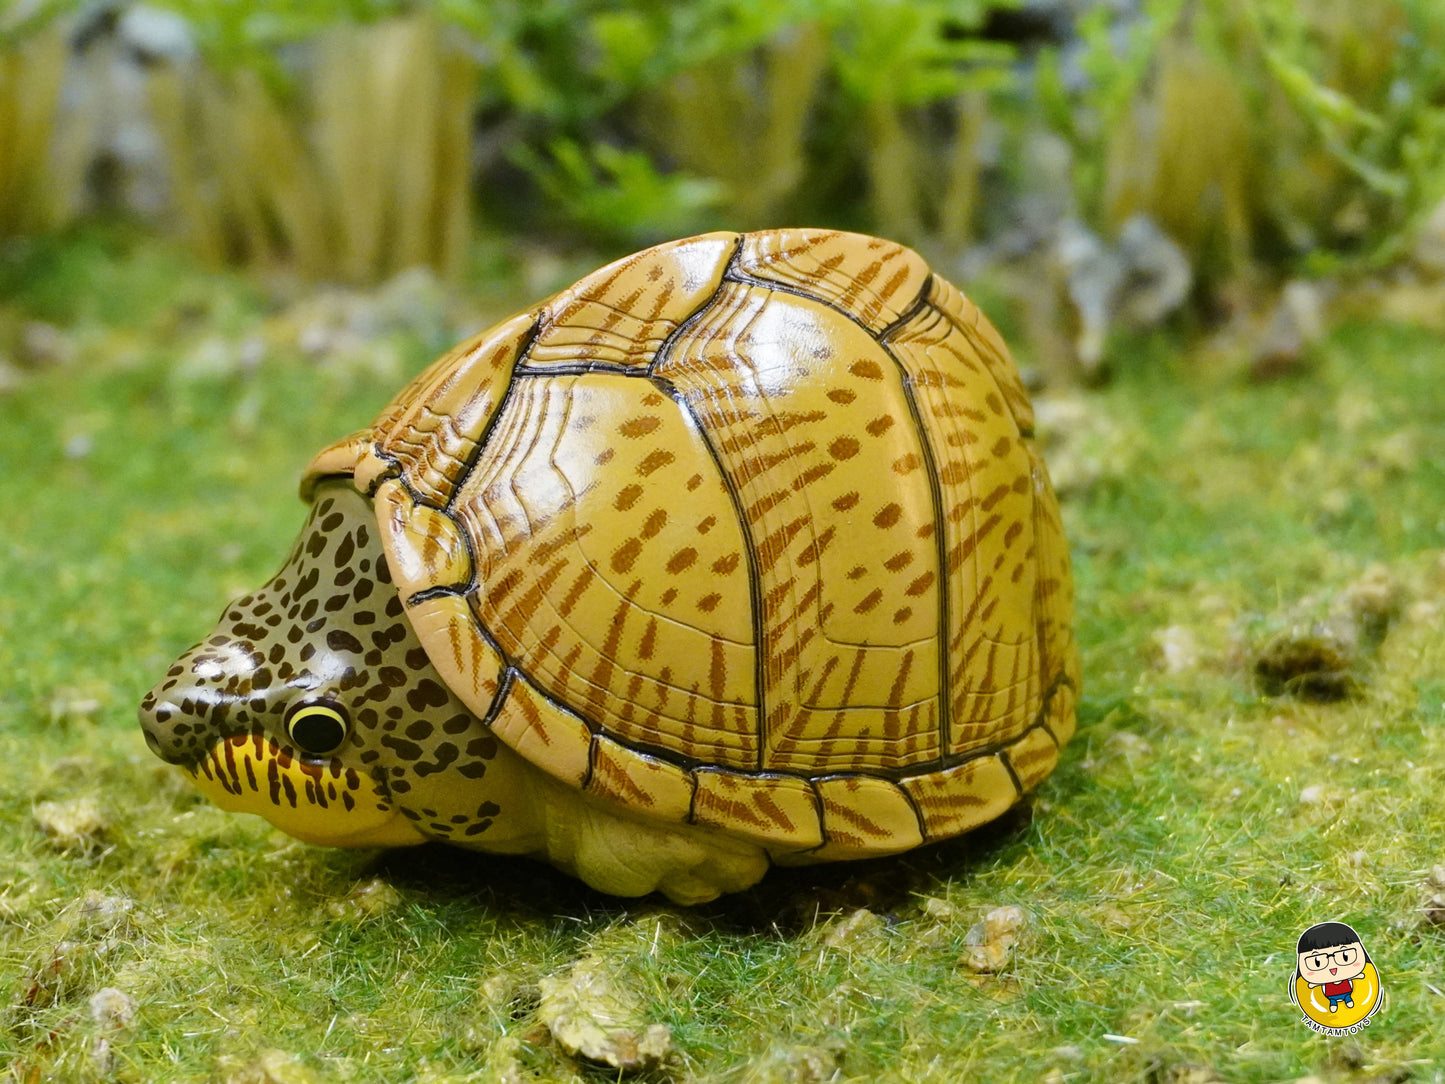 Laugh and grow fat - turtles - Sternotherus carinatus